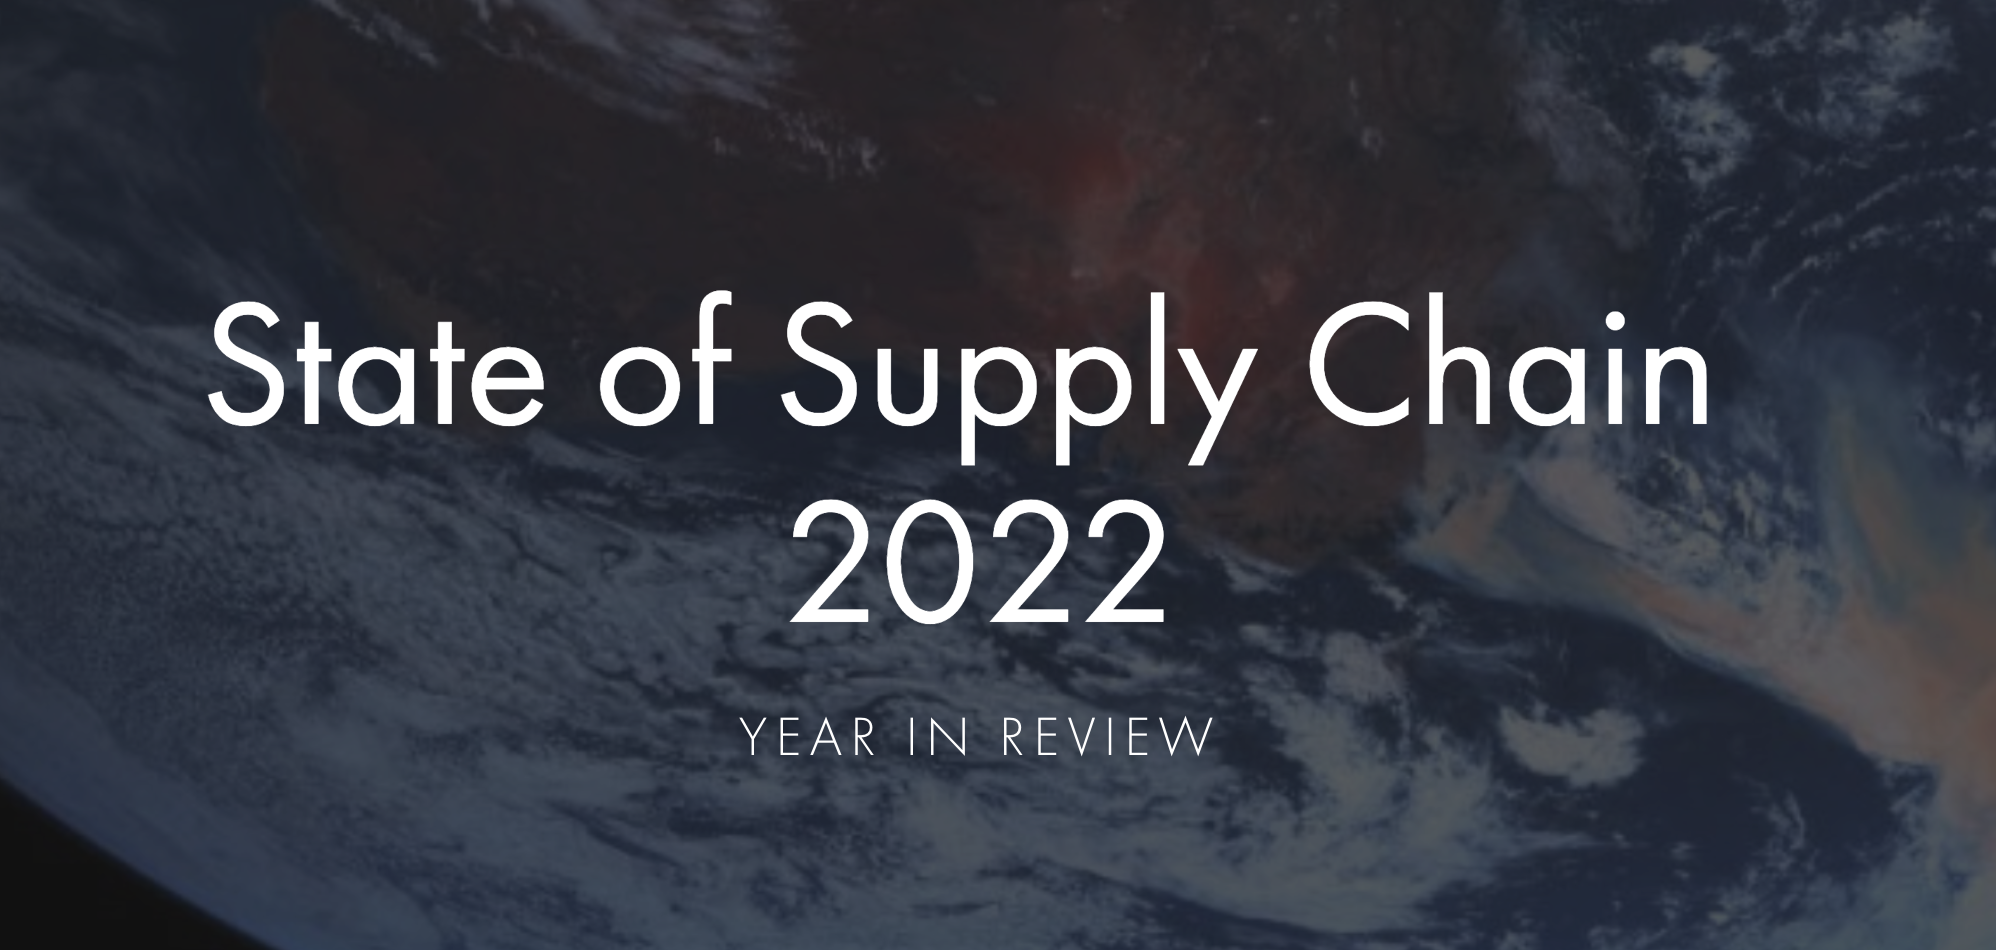 Overwatch featured in the State of Supply Chain 2022 (Year in Review)